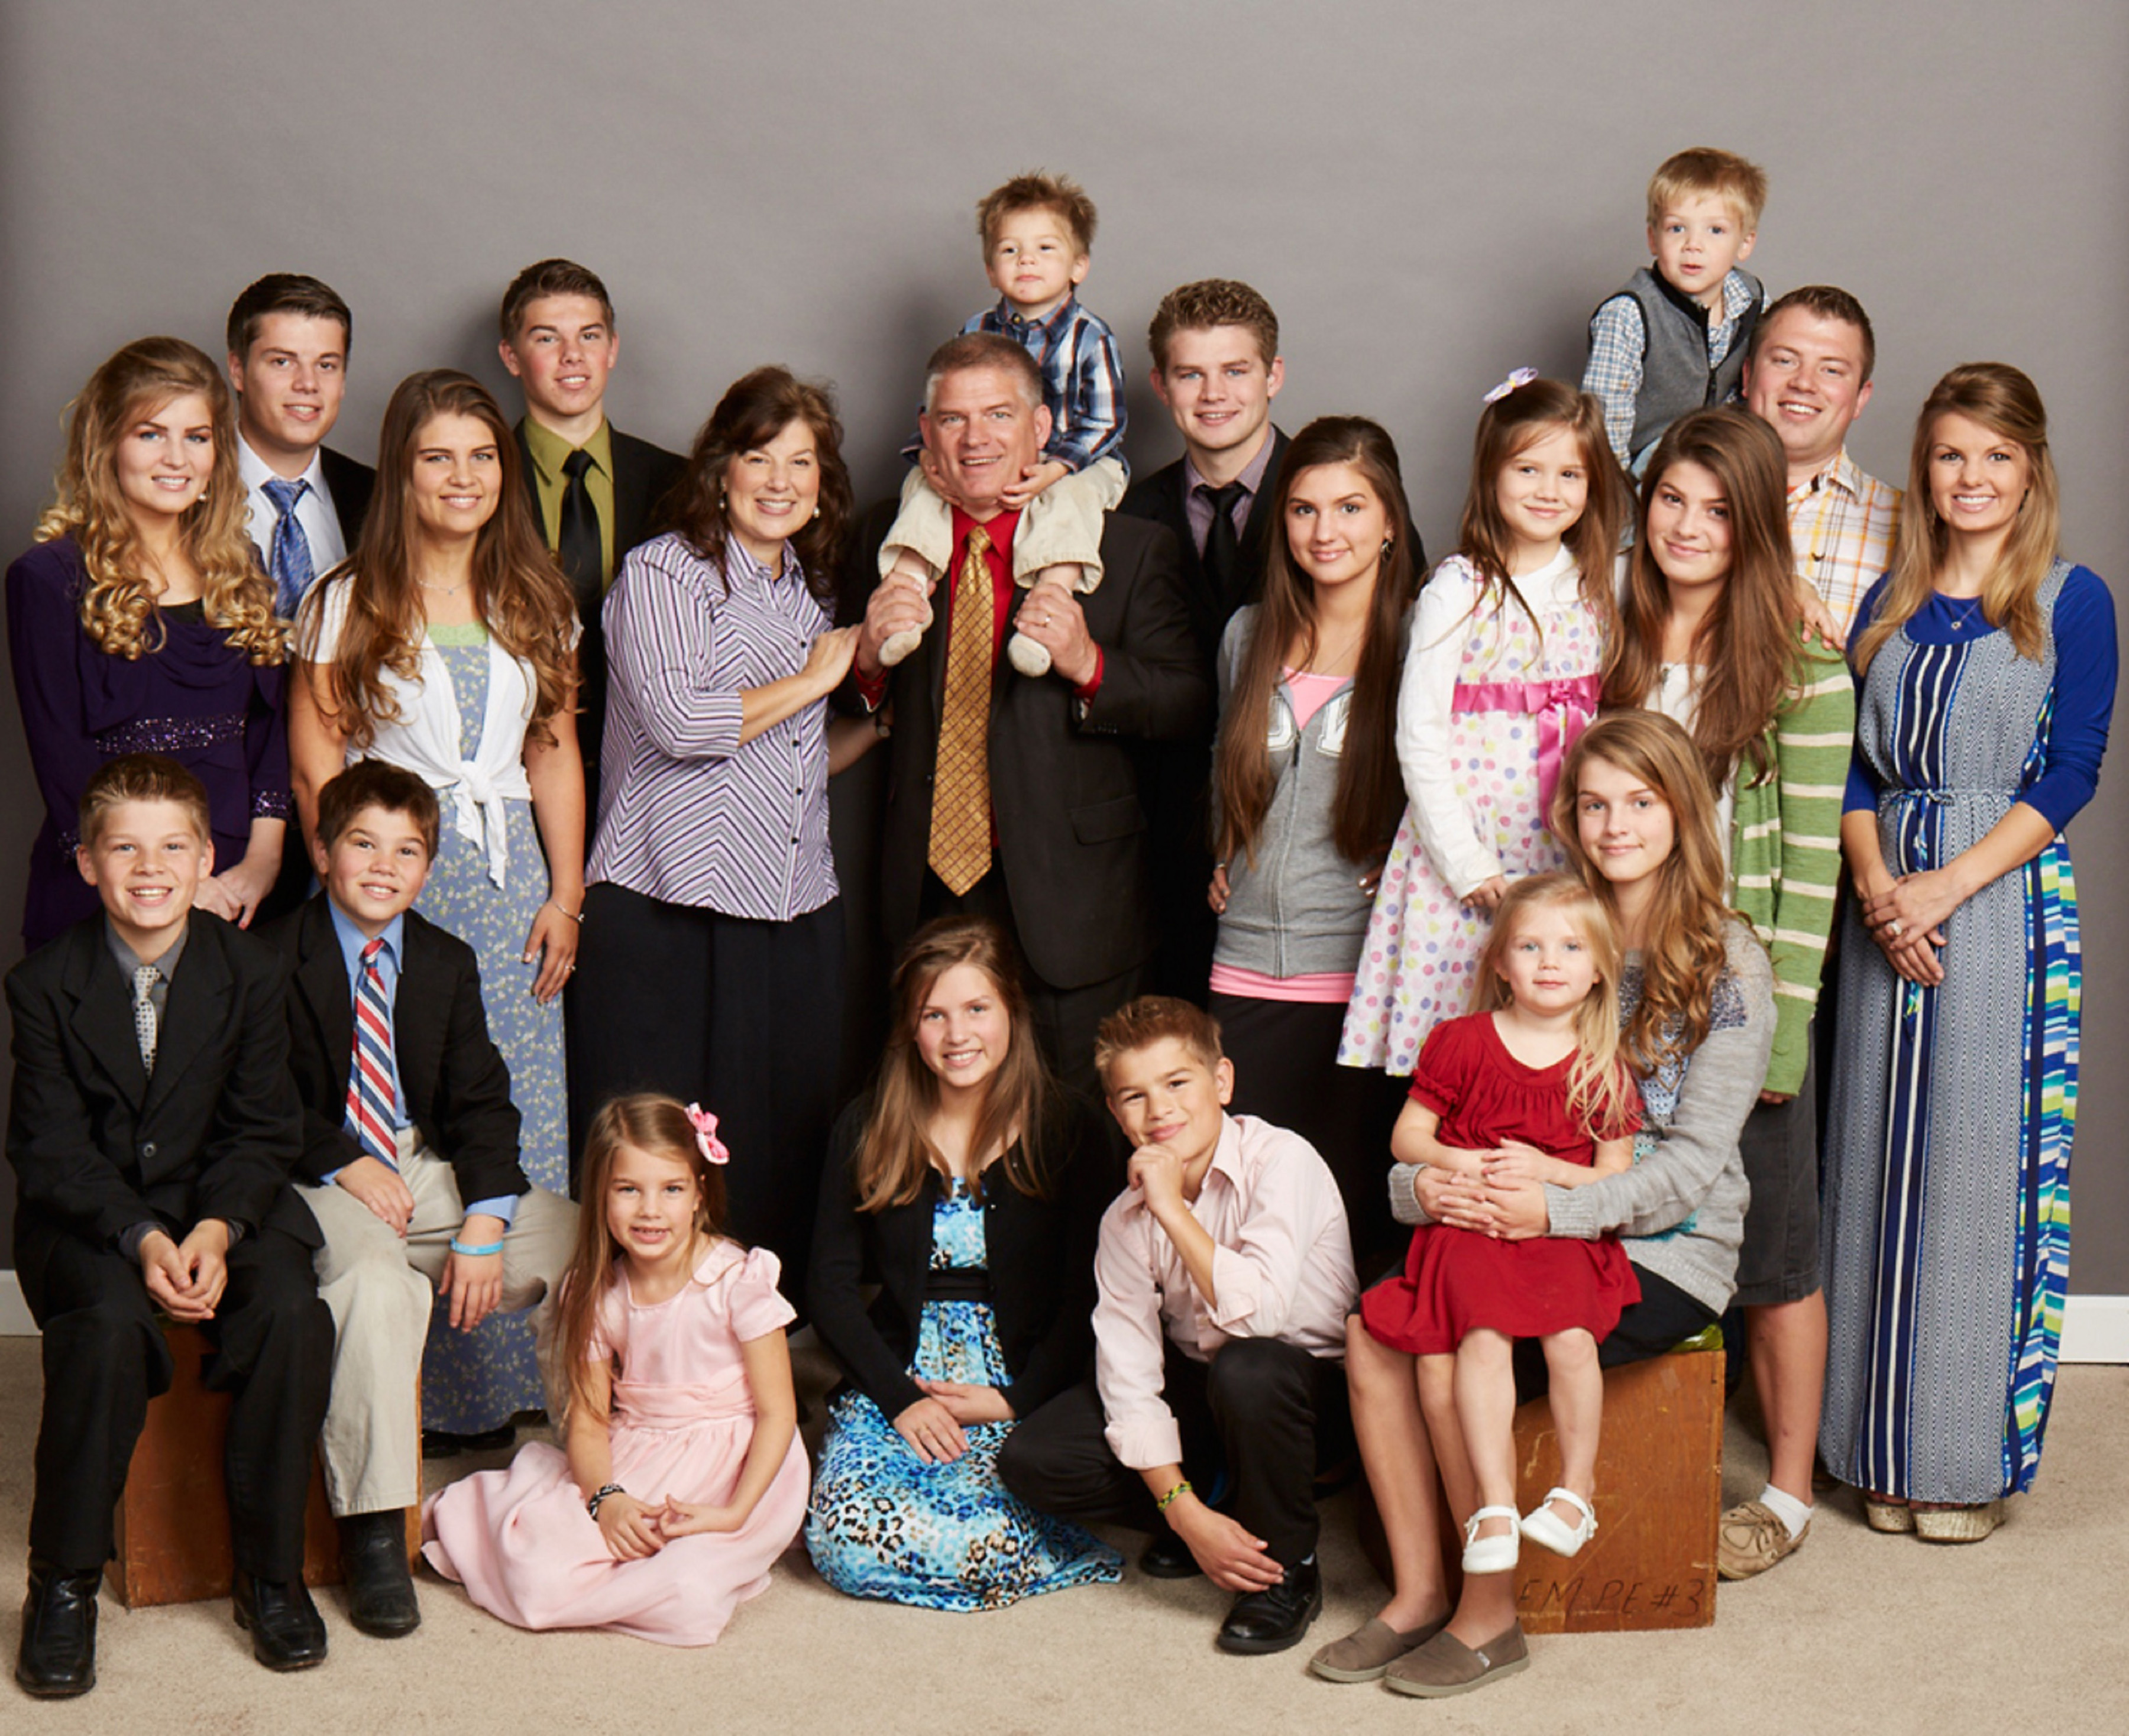 The Bates family of 'Bringing Up Bates' pose for a promotional photo